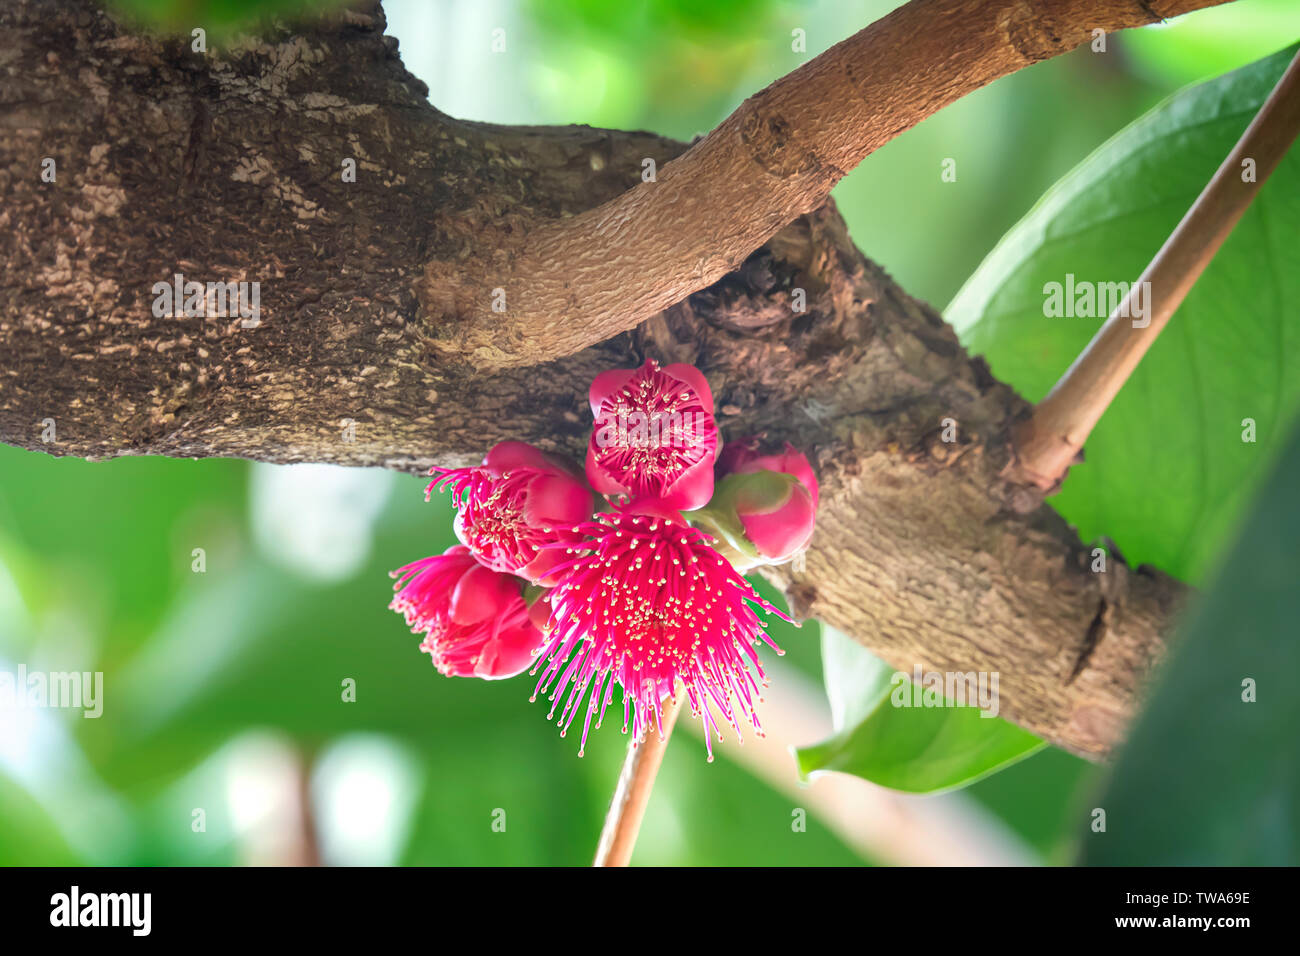 pink flower of Malay rose apple which is the tropical fruit. The scientific name is Syzygium malaccense Stock Photo